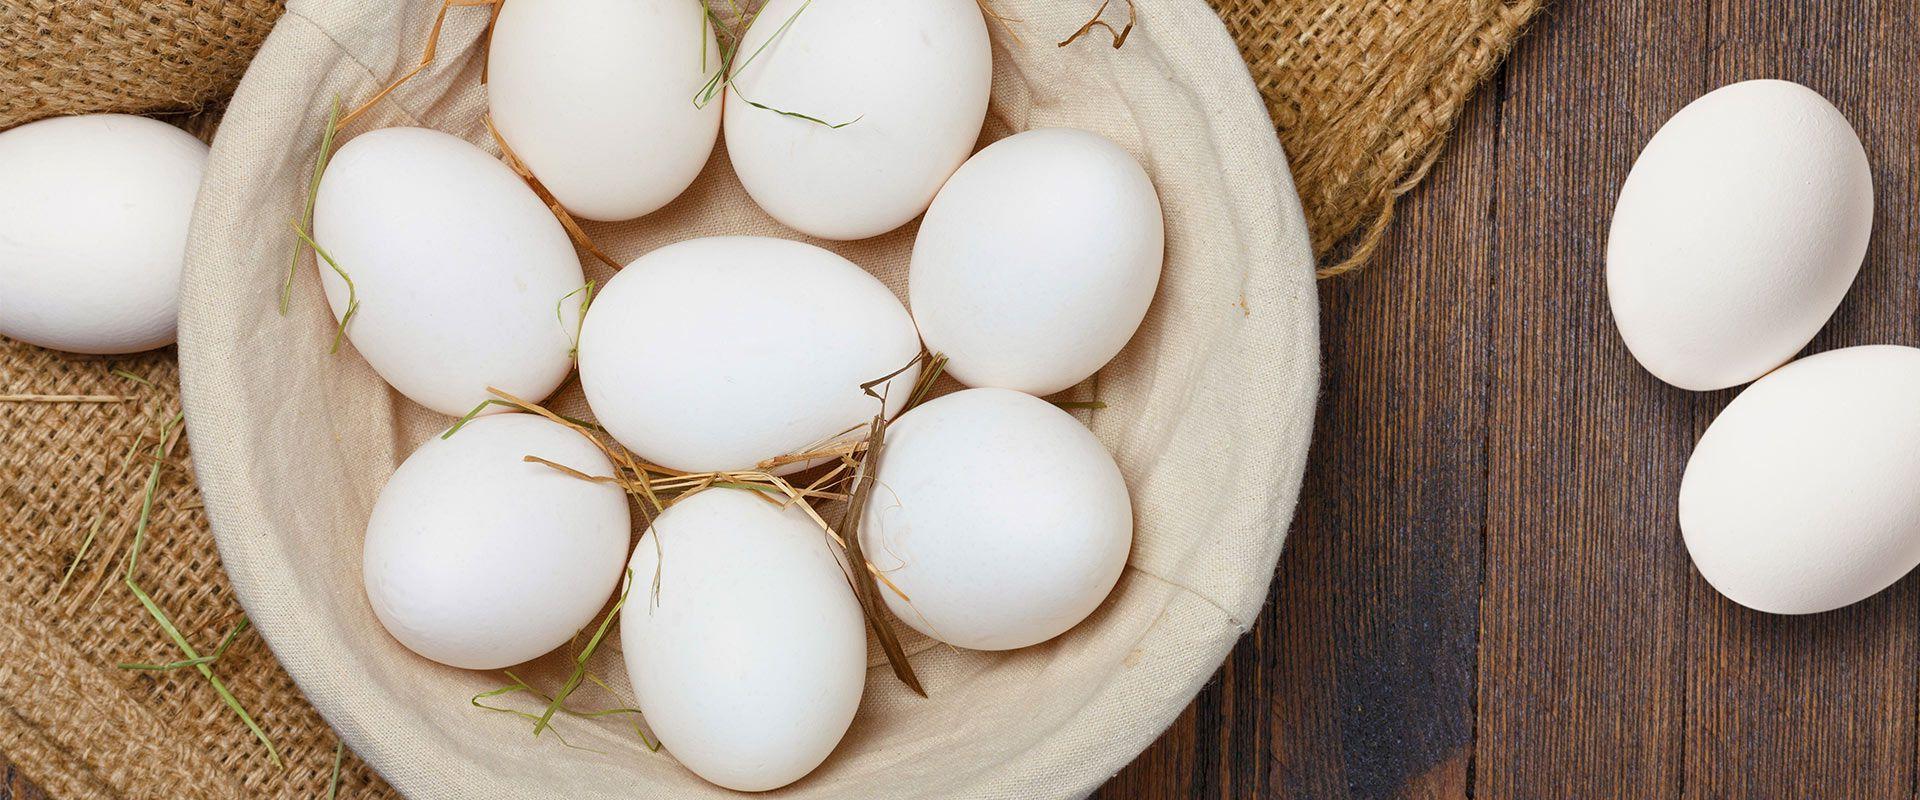 Learn about the benefits of nutritious eggs